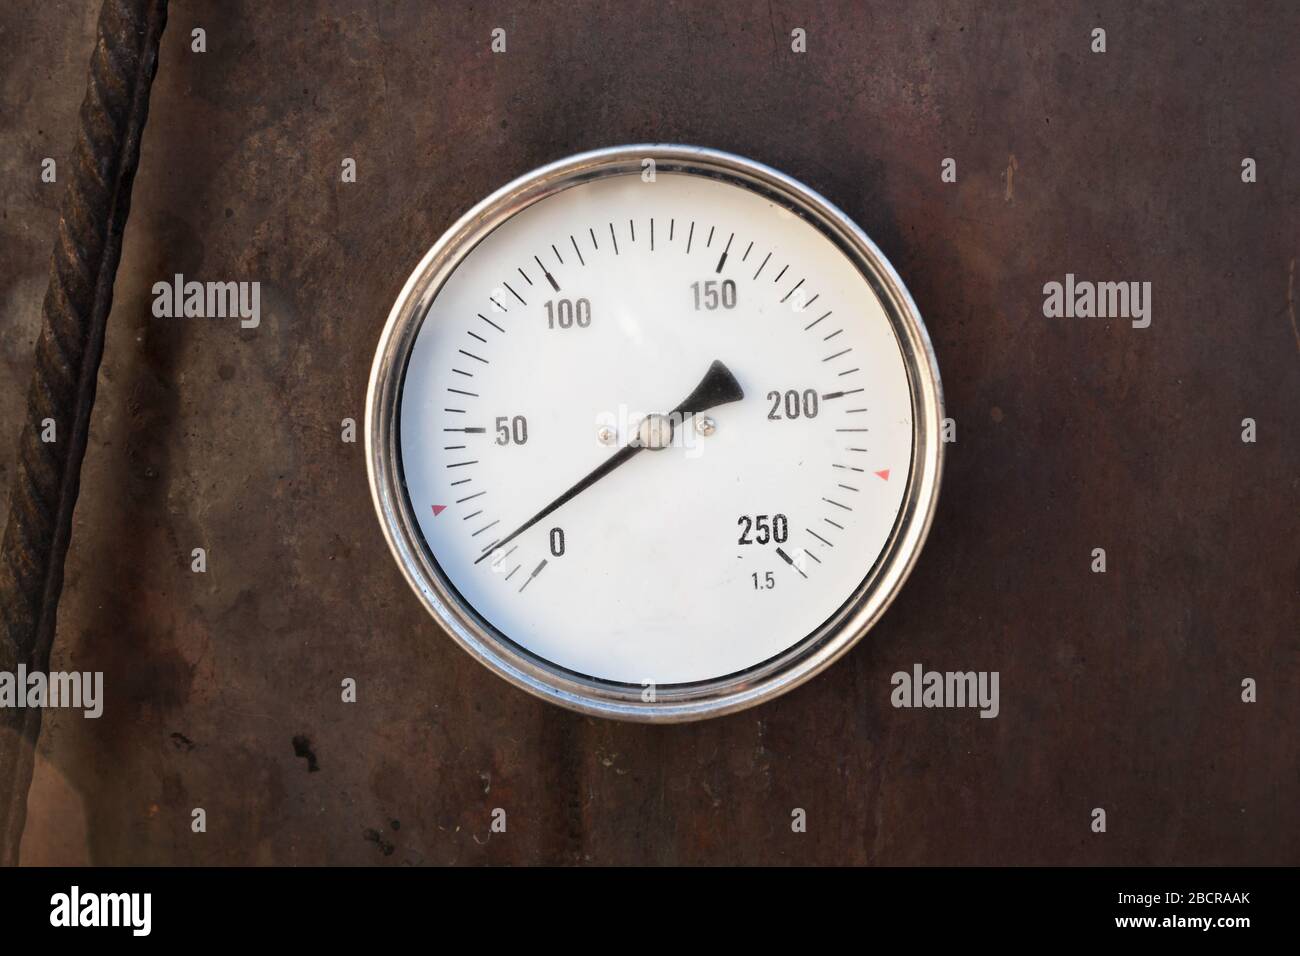 https://c8.alamy.com/comp/2BCRAAK/axial-thermometer-mounted-in-rusty-steel-stove-close-up-photo-2BCRAAK.jpg